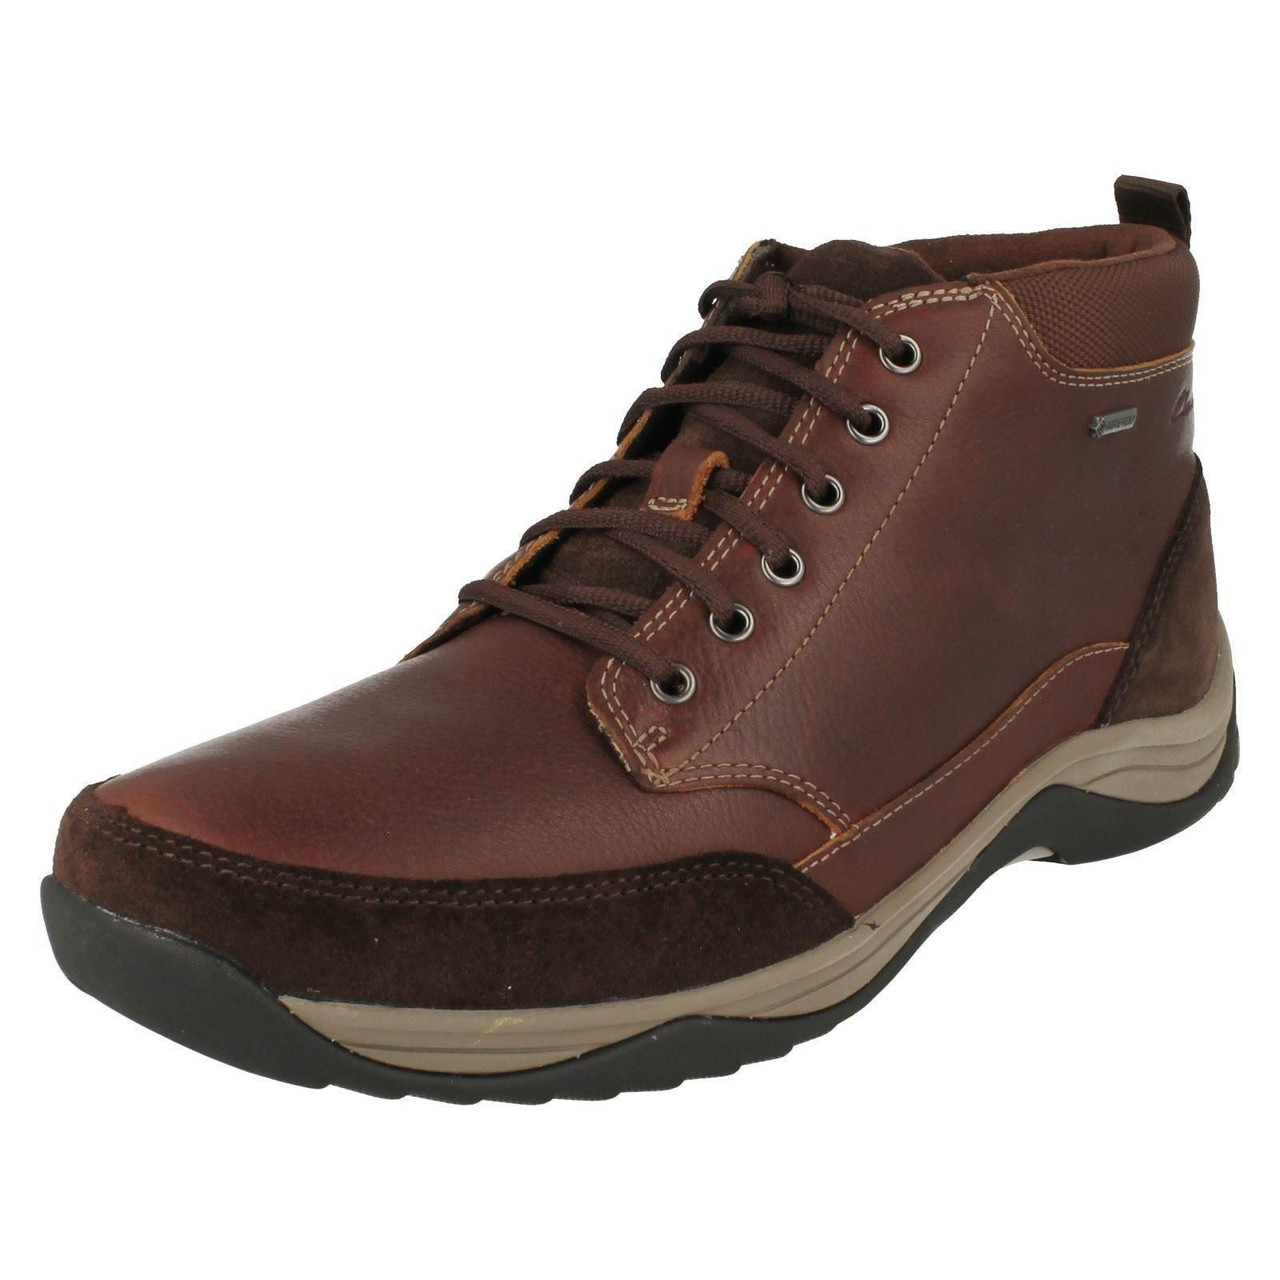 Mens Clarks Waterproof Lace Up Boots Baystone Top GTX